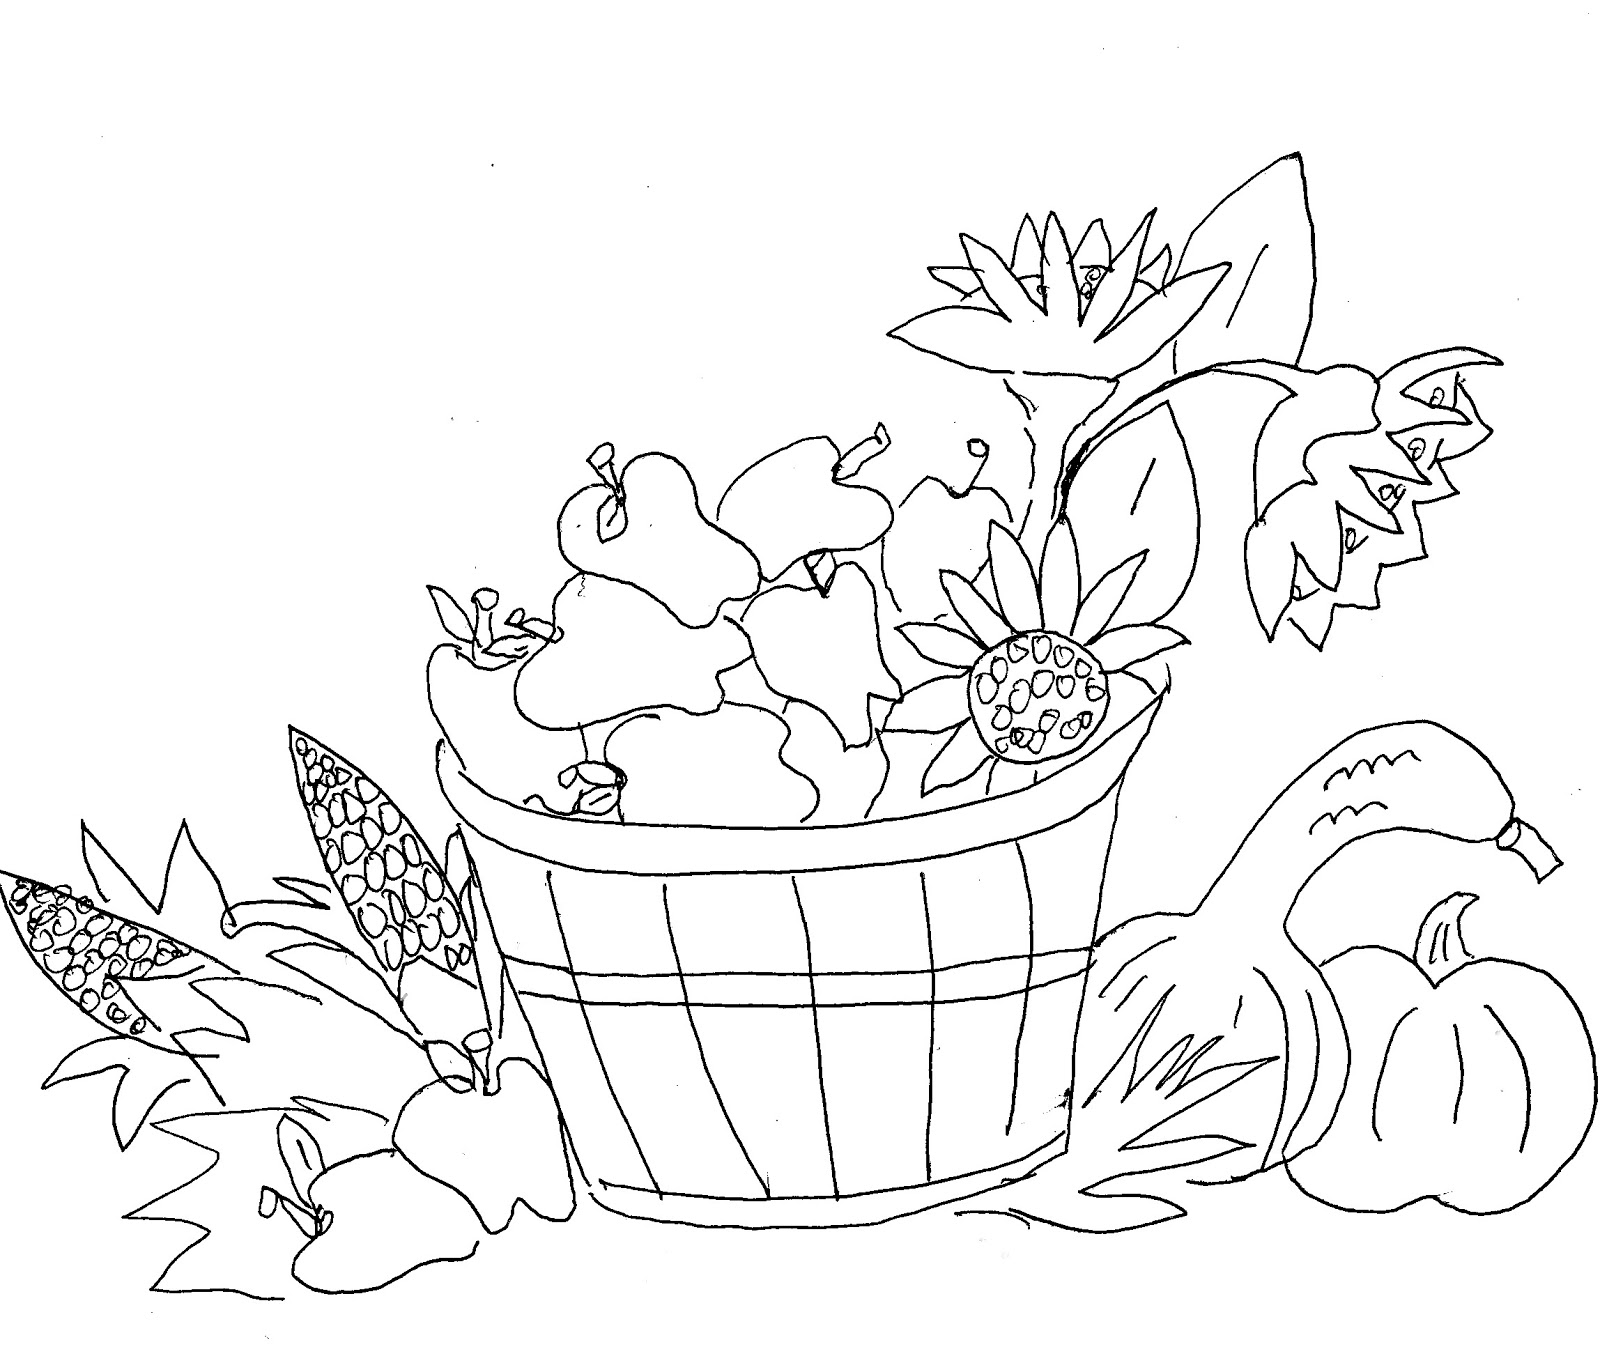 free black and white harvest clipart - photo #36